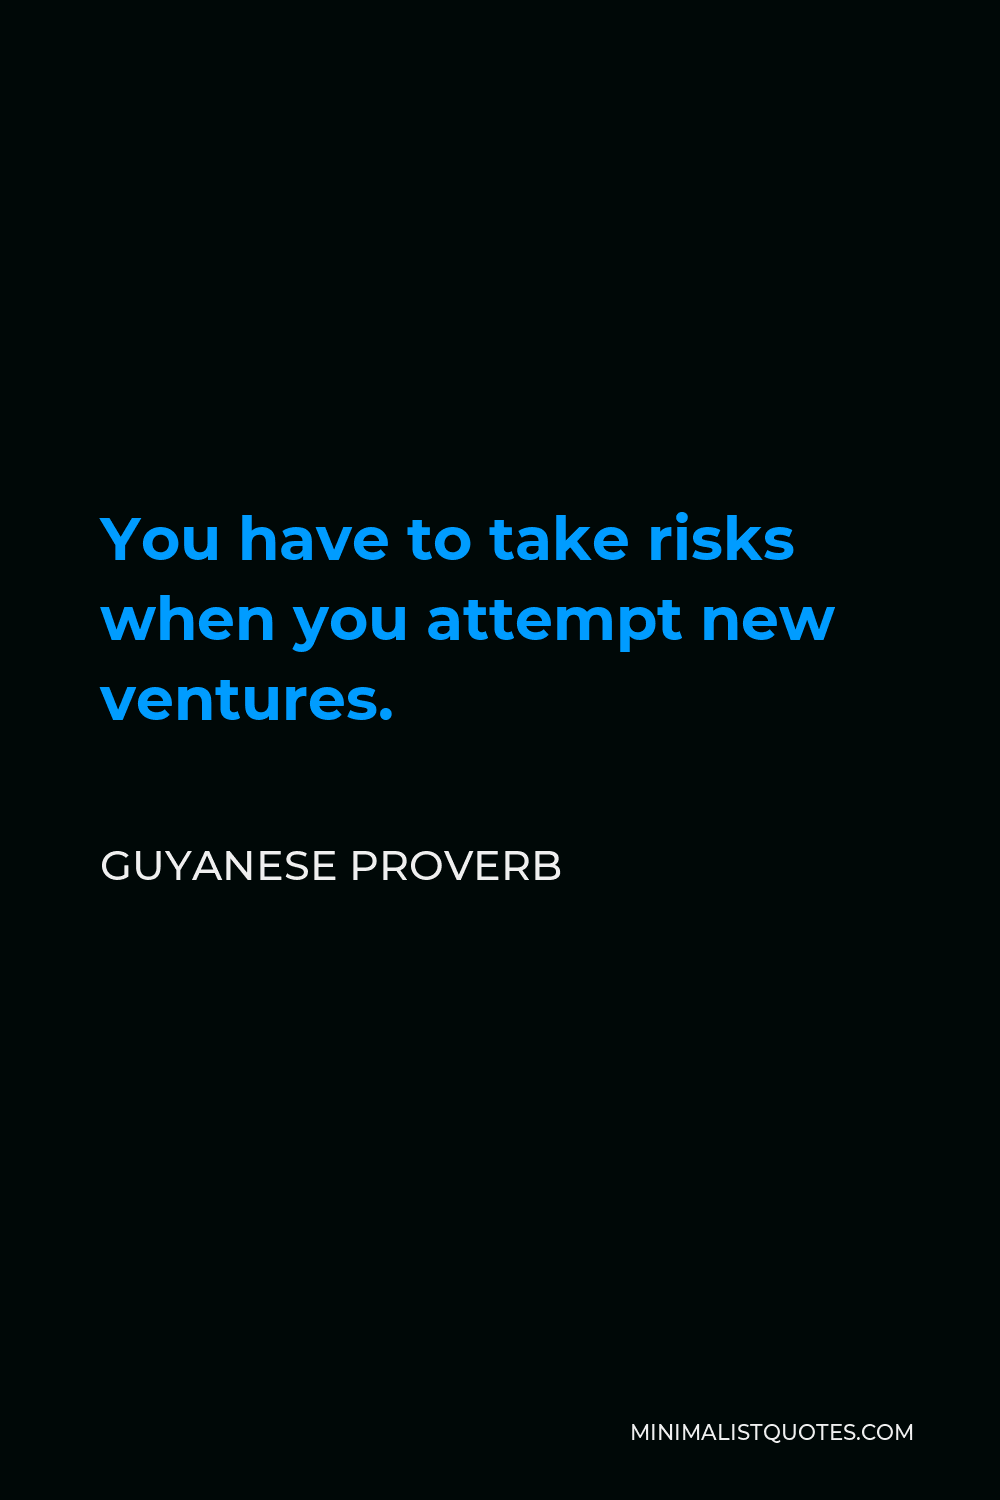 Guyanese Proverb Quote - You have to take risks when you attempt new ventures.